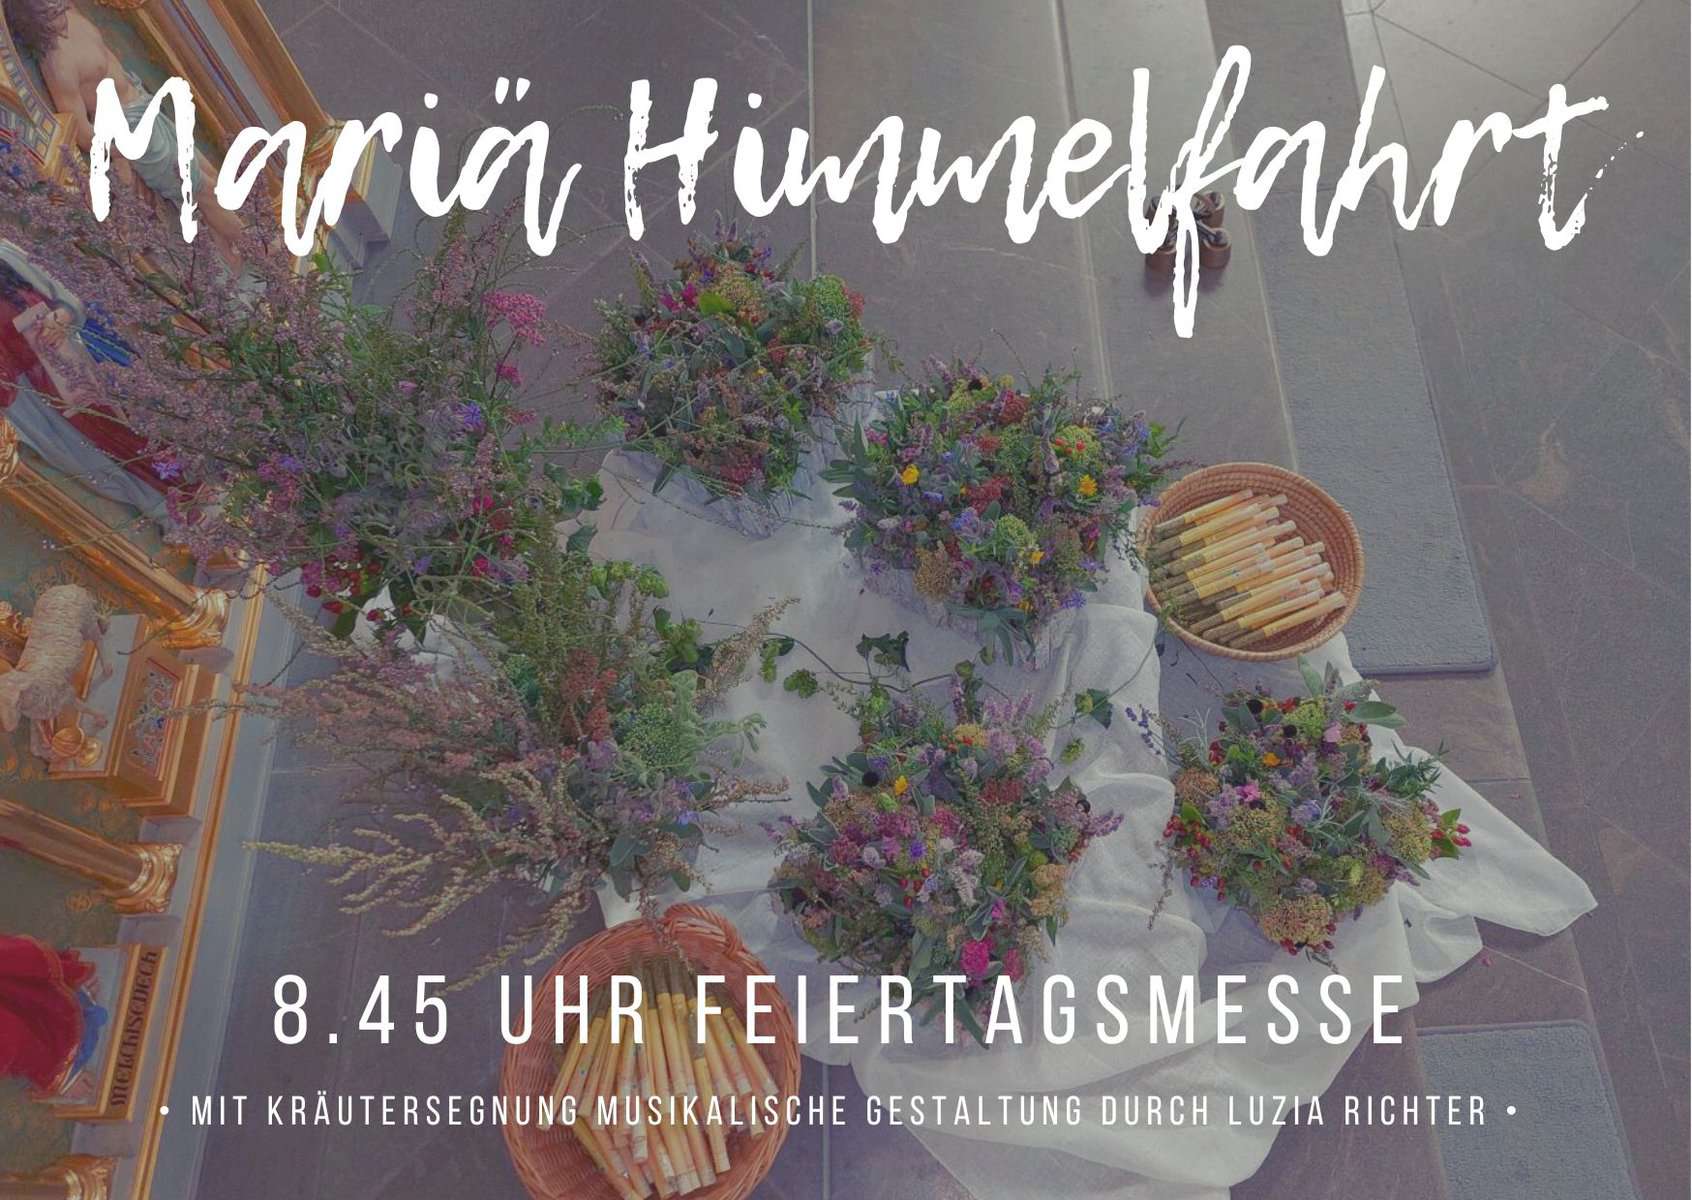 You are currently viewing Mariä Himmelfahrt 15. August 23